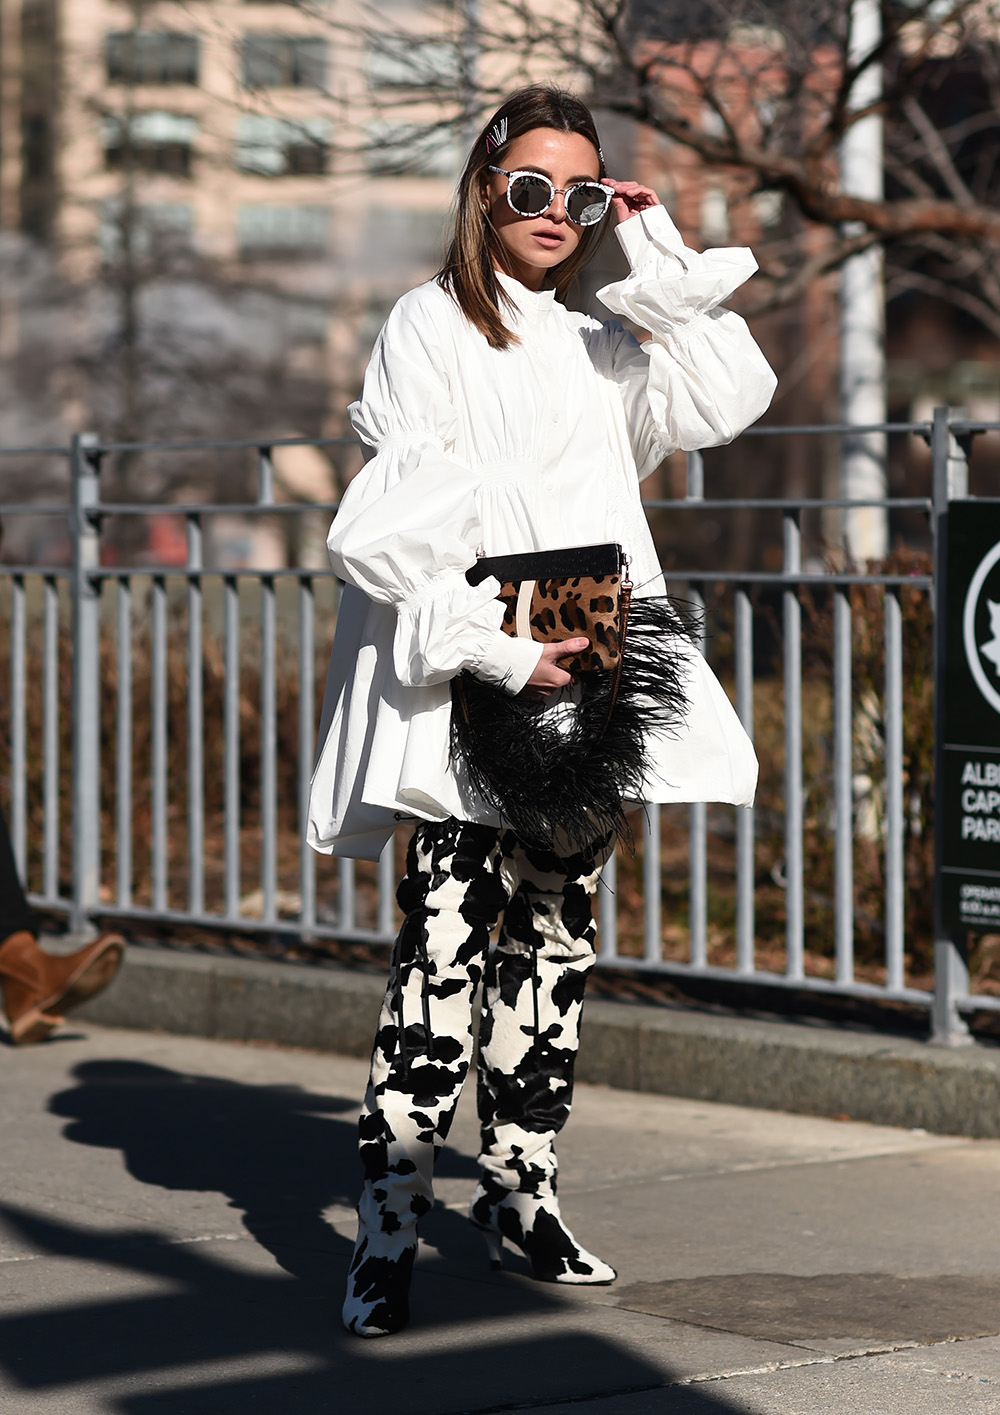 NEW YORK, NEW YORK - FEBRUARY 09: A guest is seen wearing a white top and black and white pants with an animal print fur purse outside the Son Jung Wan show during New York Fashion Week: Fall/Winter 2019 on February 09, 2019 in New York City. (Photo by Daniel Zuchnik/Getty Images)